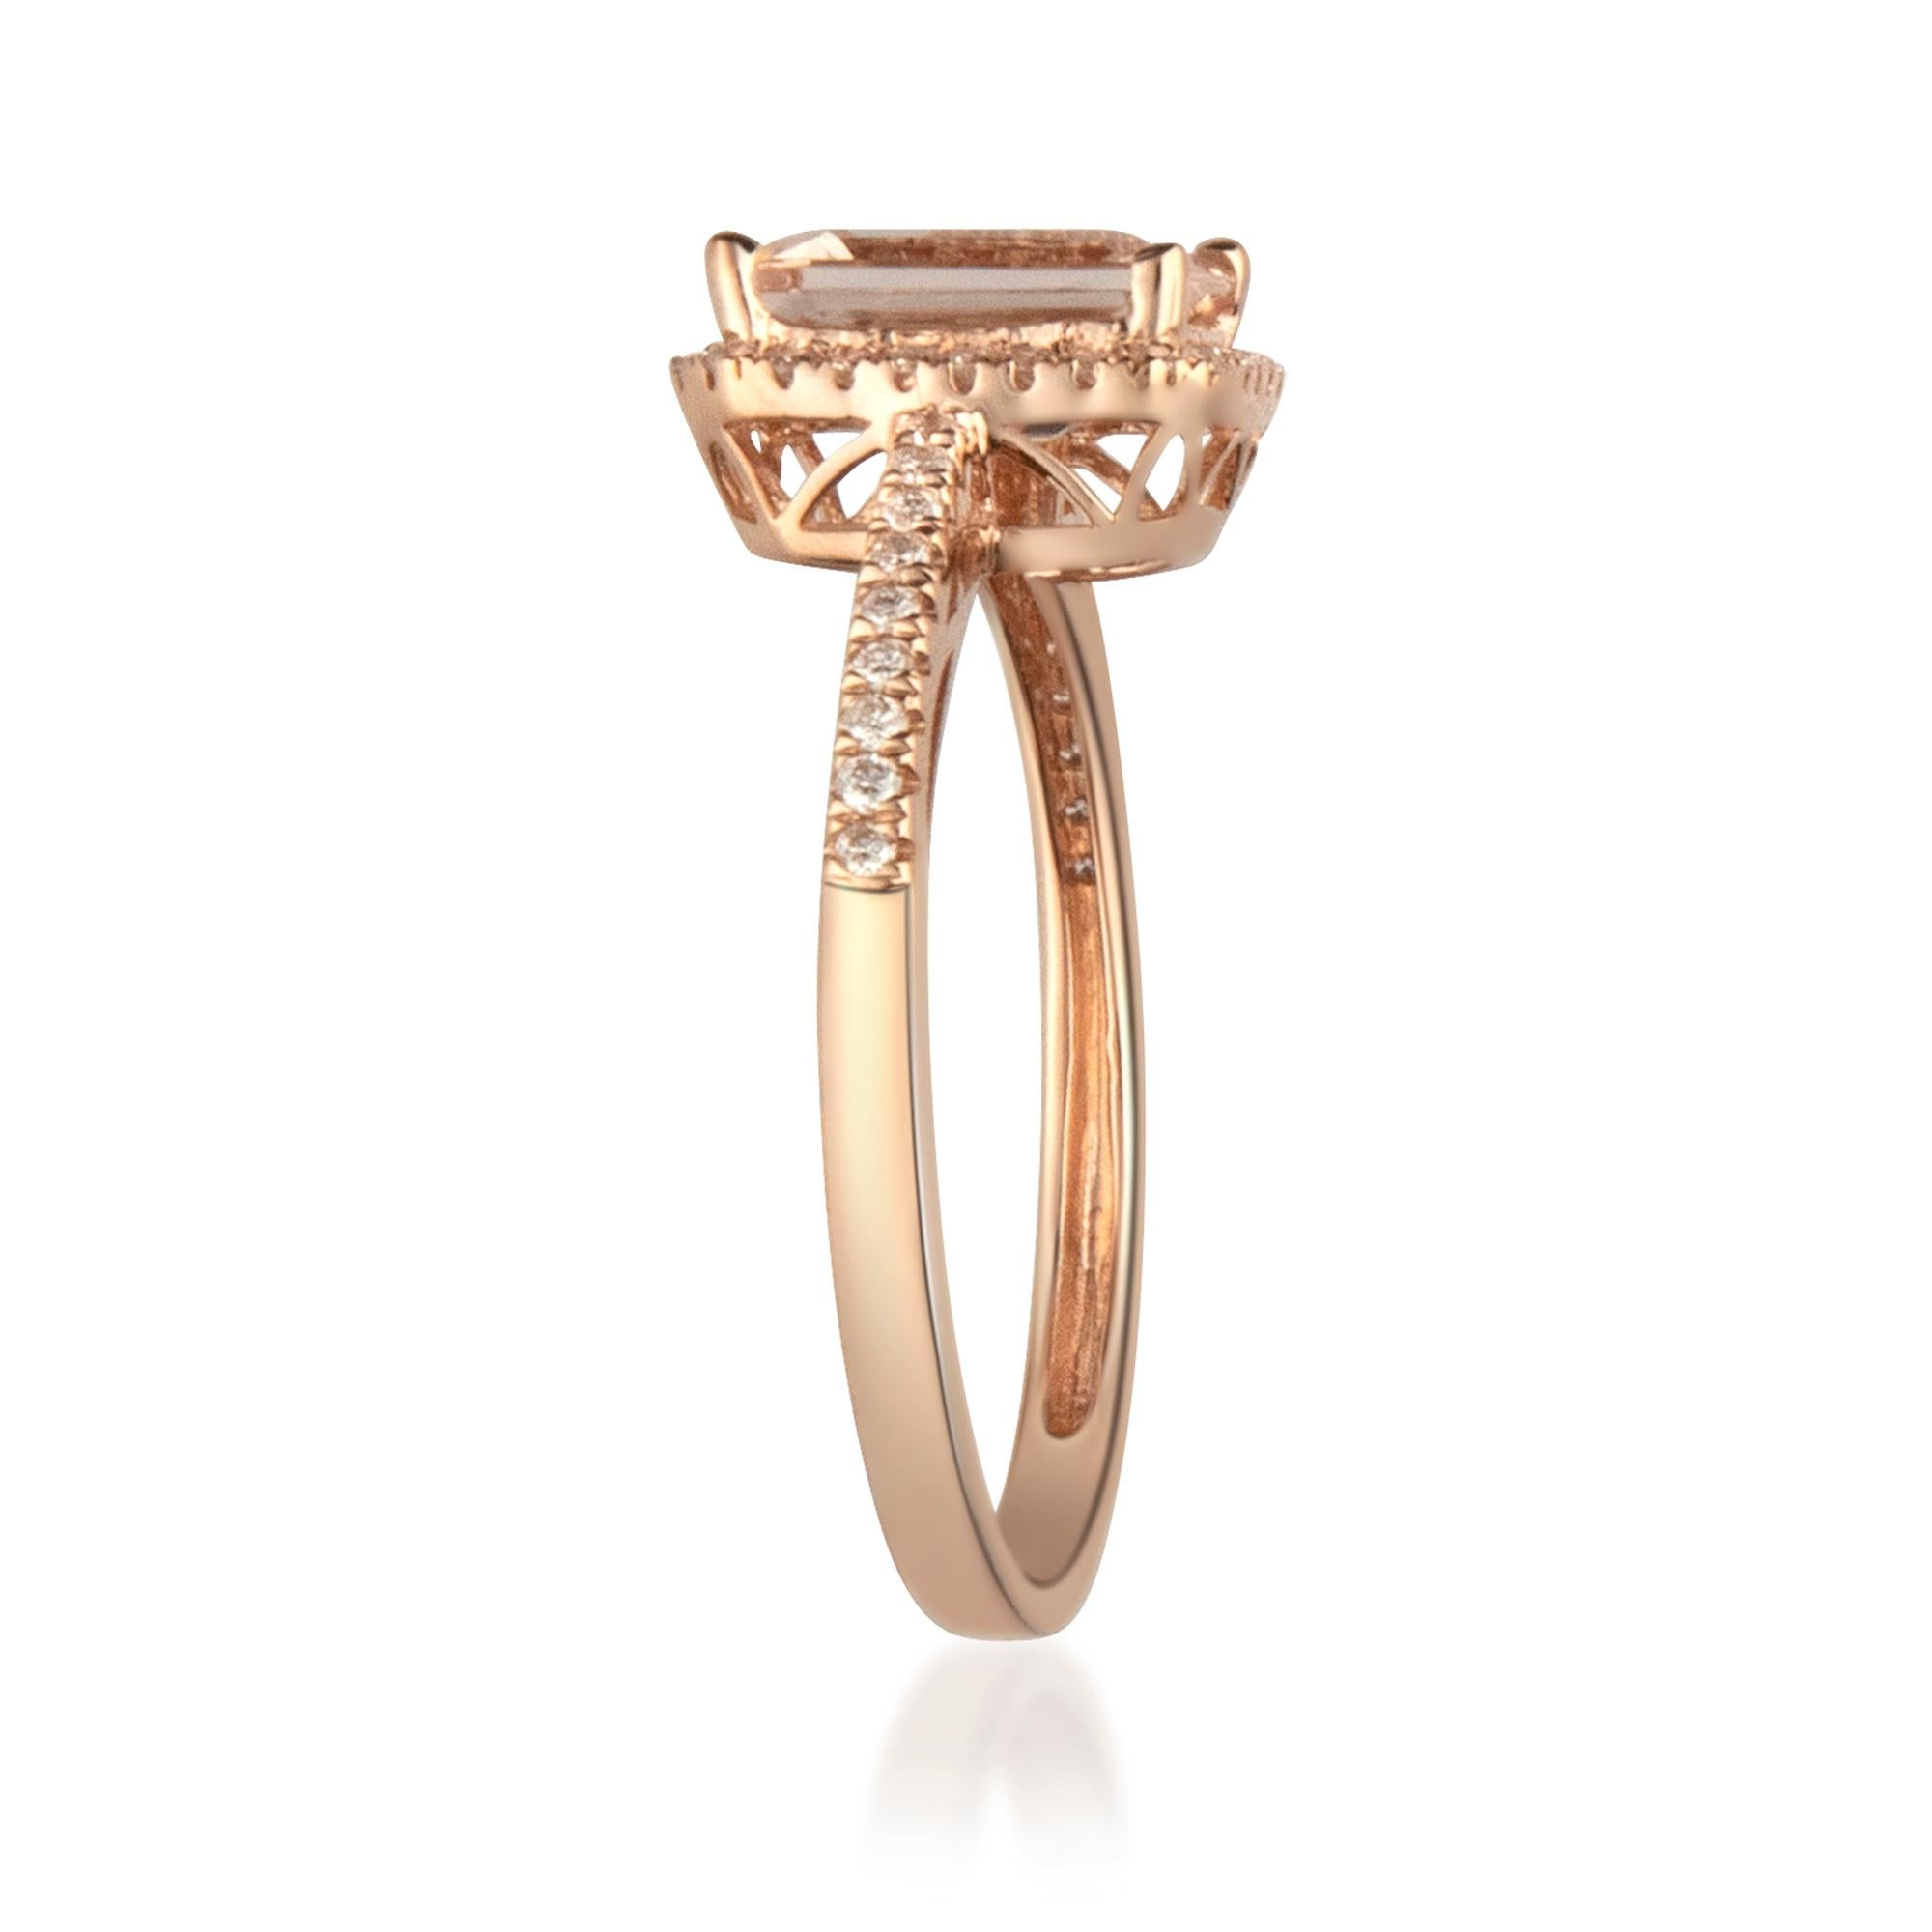 This beautiful Genuine Morganite Ring is crafted in 14-karat Rose gold and features a 1.38 carat 1 Pc Genuine Morganite and 46 Pcs Round White Diamonds in GH- I1 quality with 0.19 Ct in a prong-setting. This Ring comes in sizes 6 to 9, and it is a